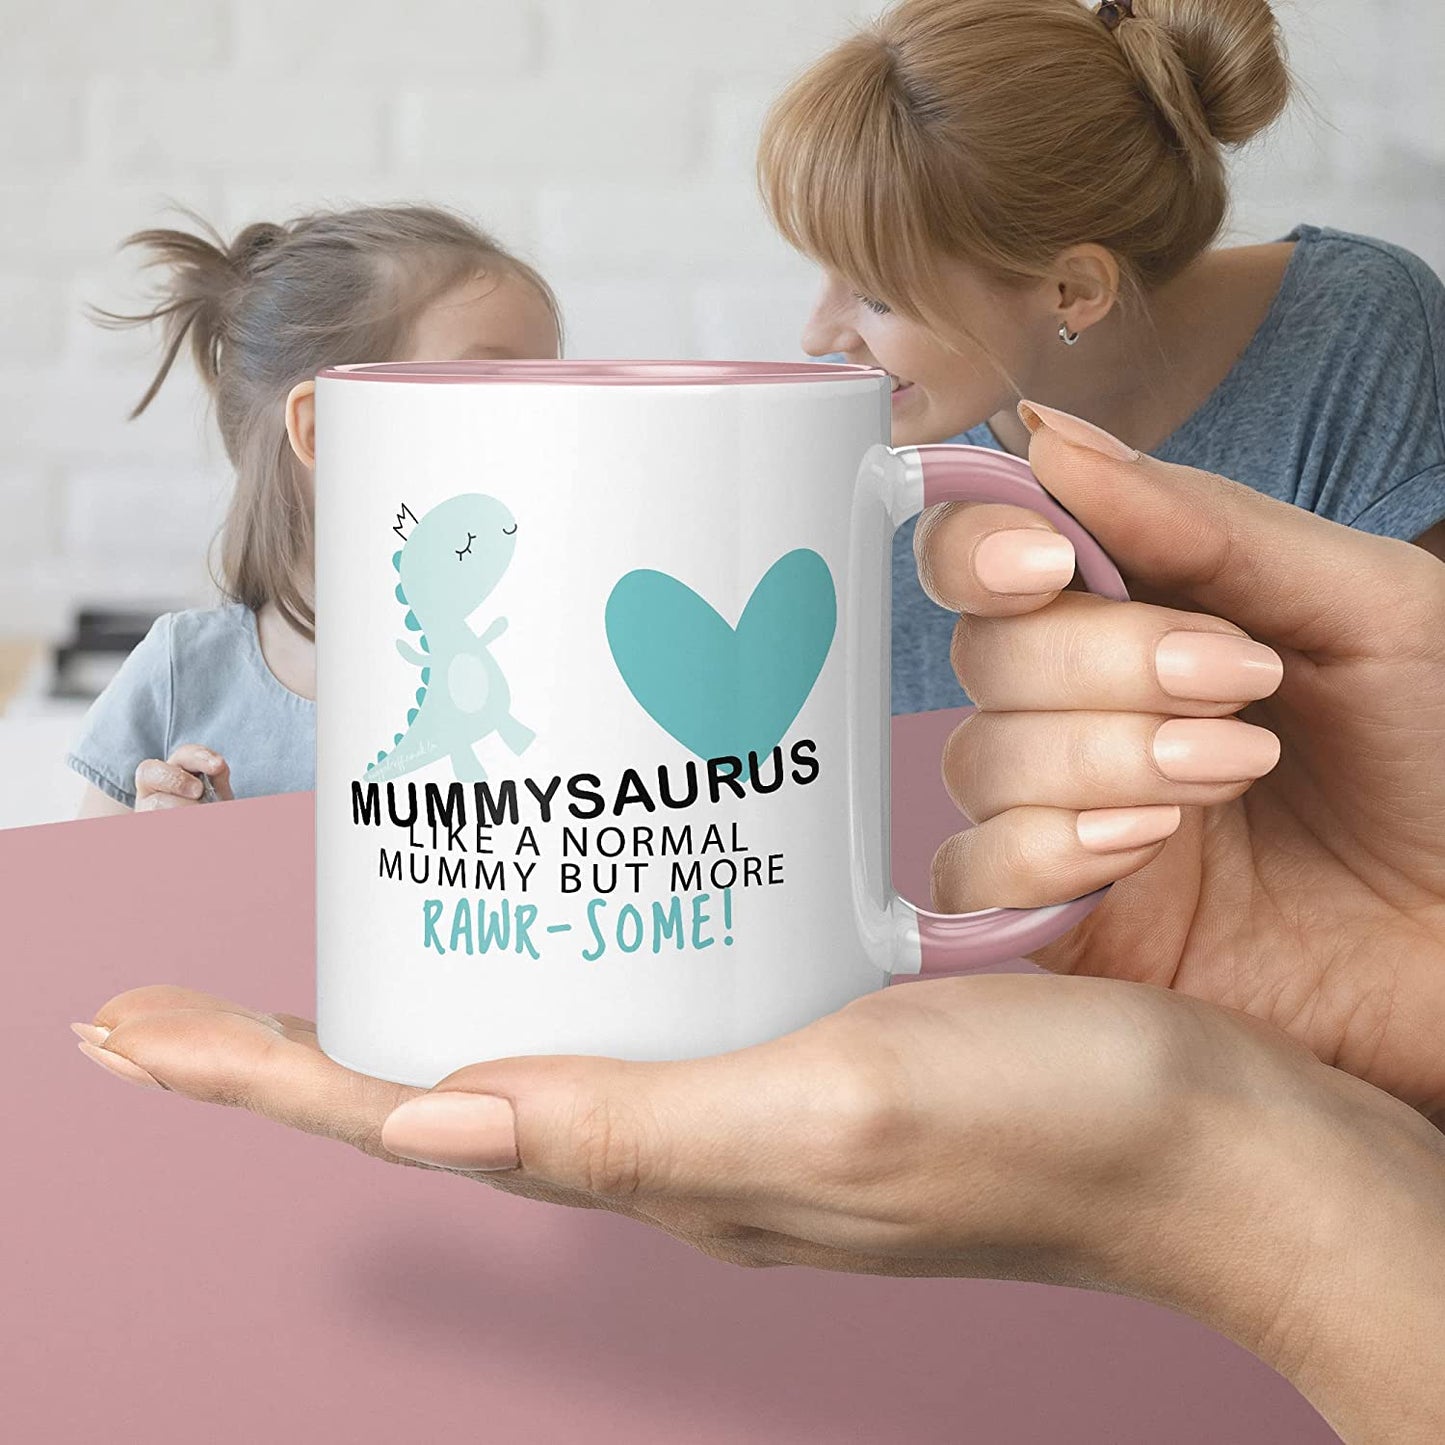 Mummy Gifts Mug Mothers Day Gift Free Delivery - Cup Cups Xmas Birthday Christmas Tea Coffee Mugs Mothers Day